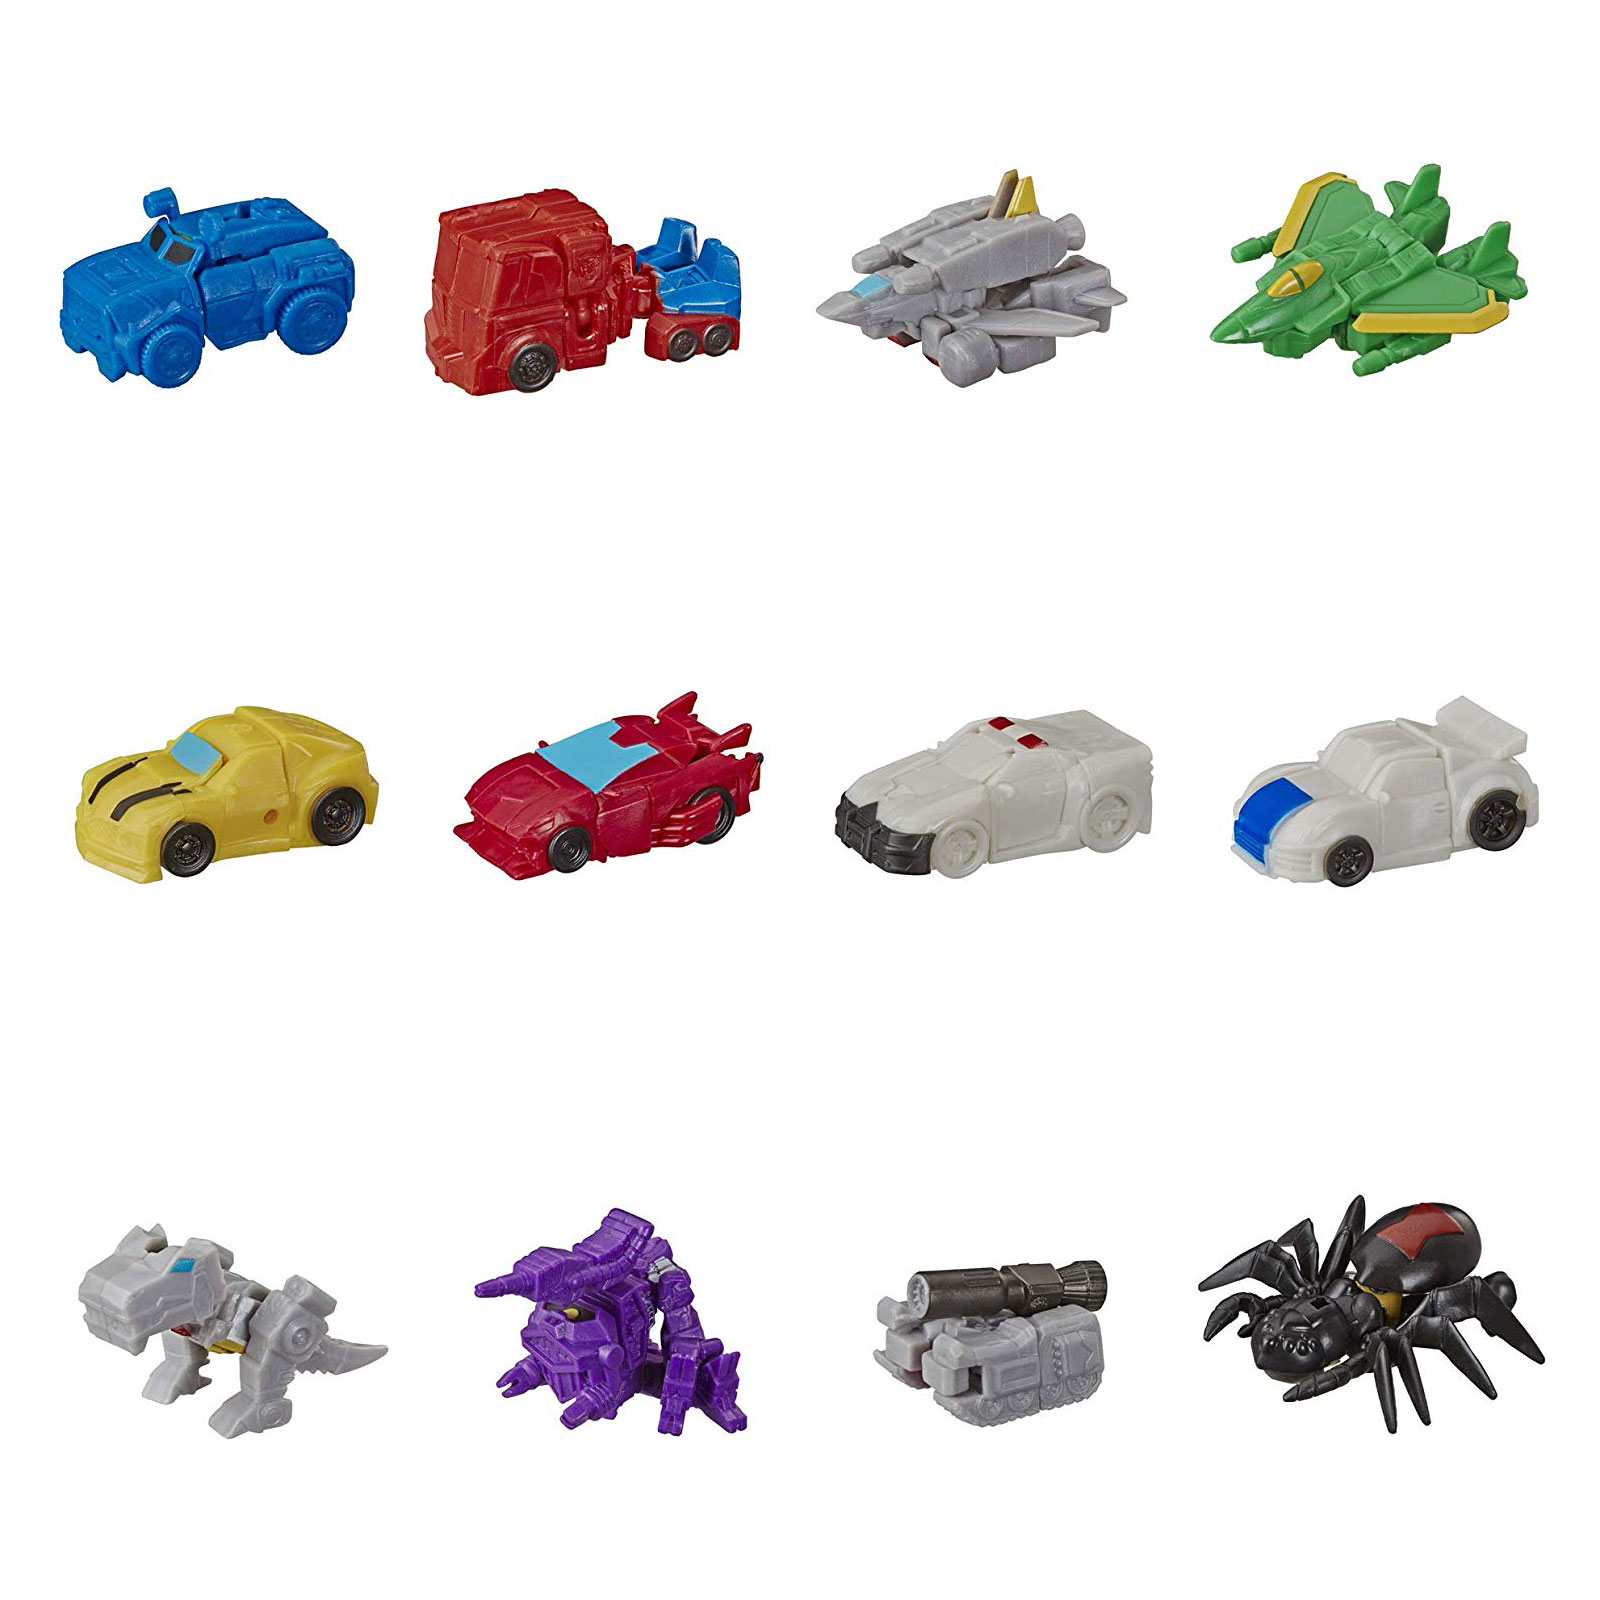 Transformers toys, Comic Books, BotBots, Masters of the Universe, Teenage Mutant Ninja Turtles, Gobots, and other listings from Seibertron.com: JAZZ Transformers Cyberverse Tiny Turbo Changers Series 2 2019 Hasbro New